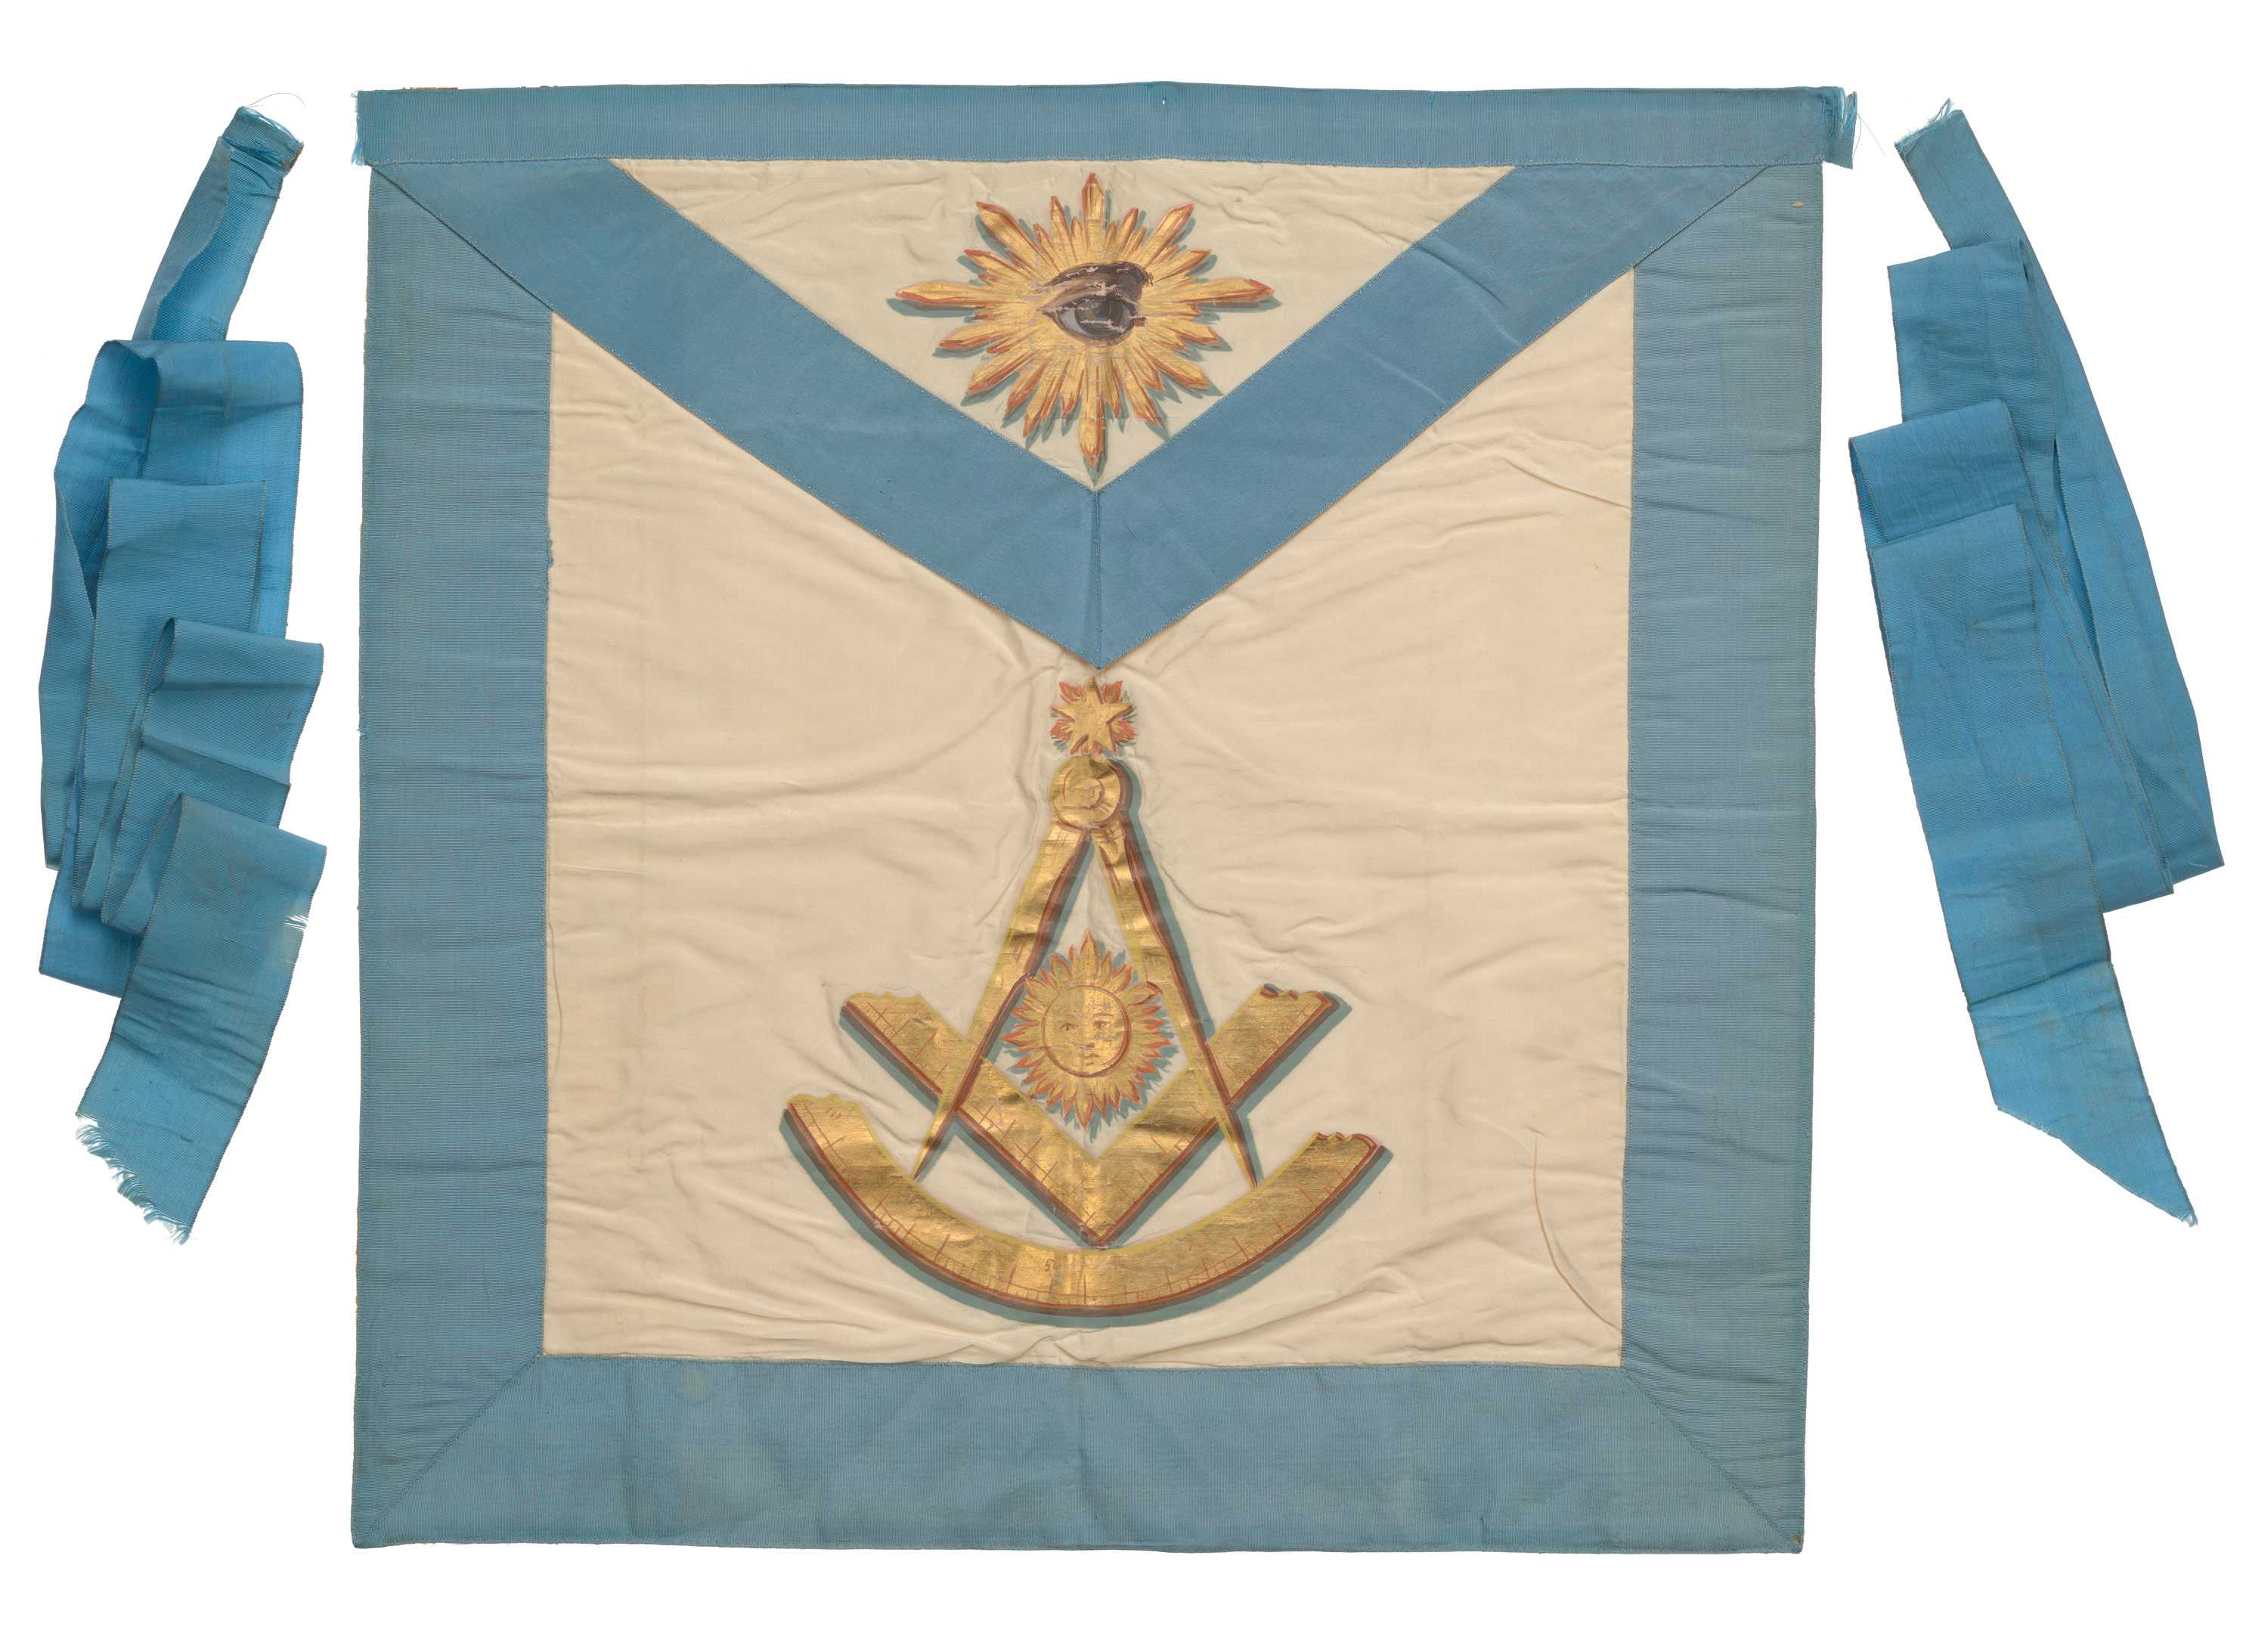 A masonic apron from the Prince Hall Grand Lodge of Massachusetts.